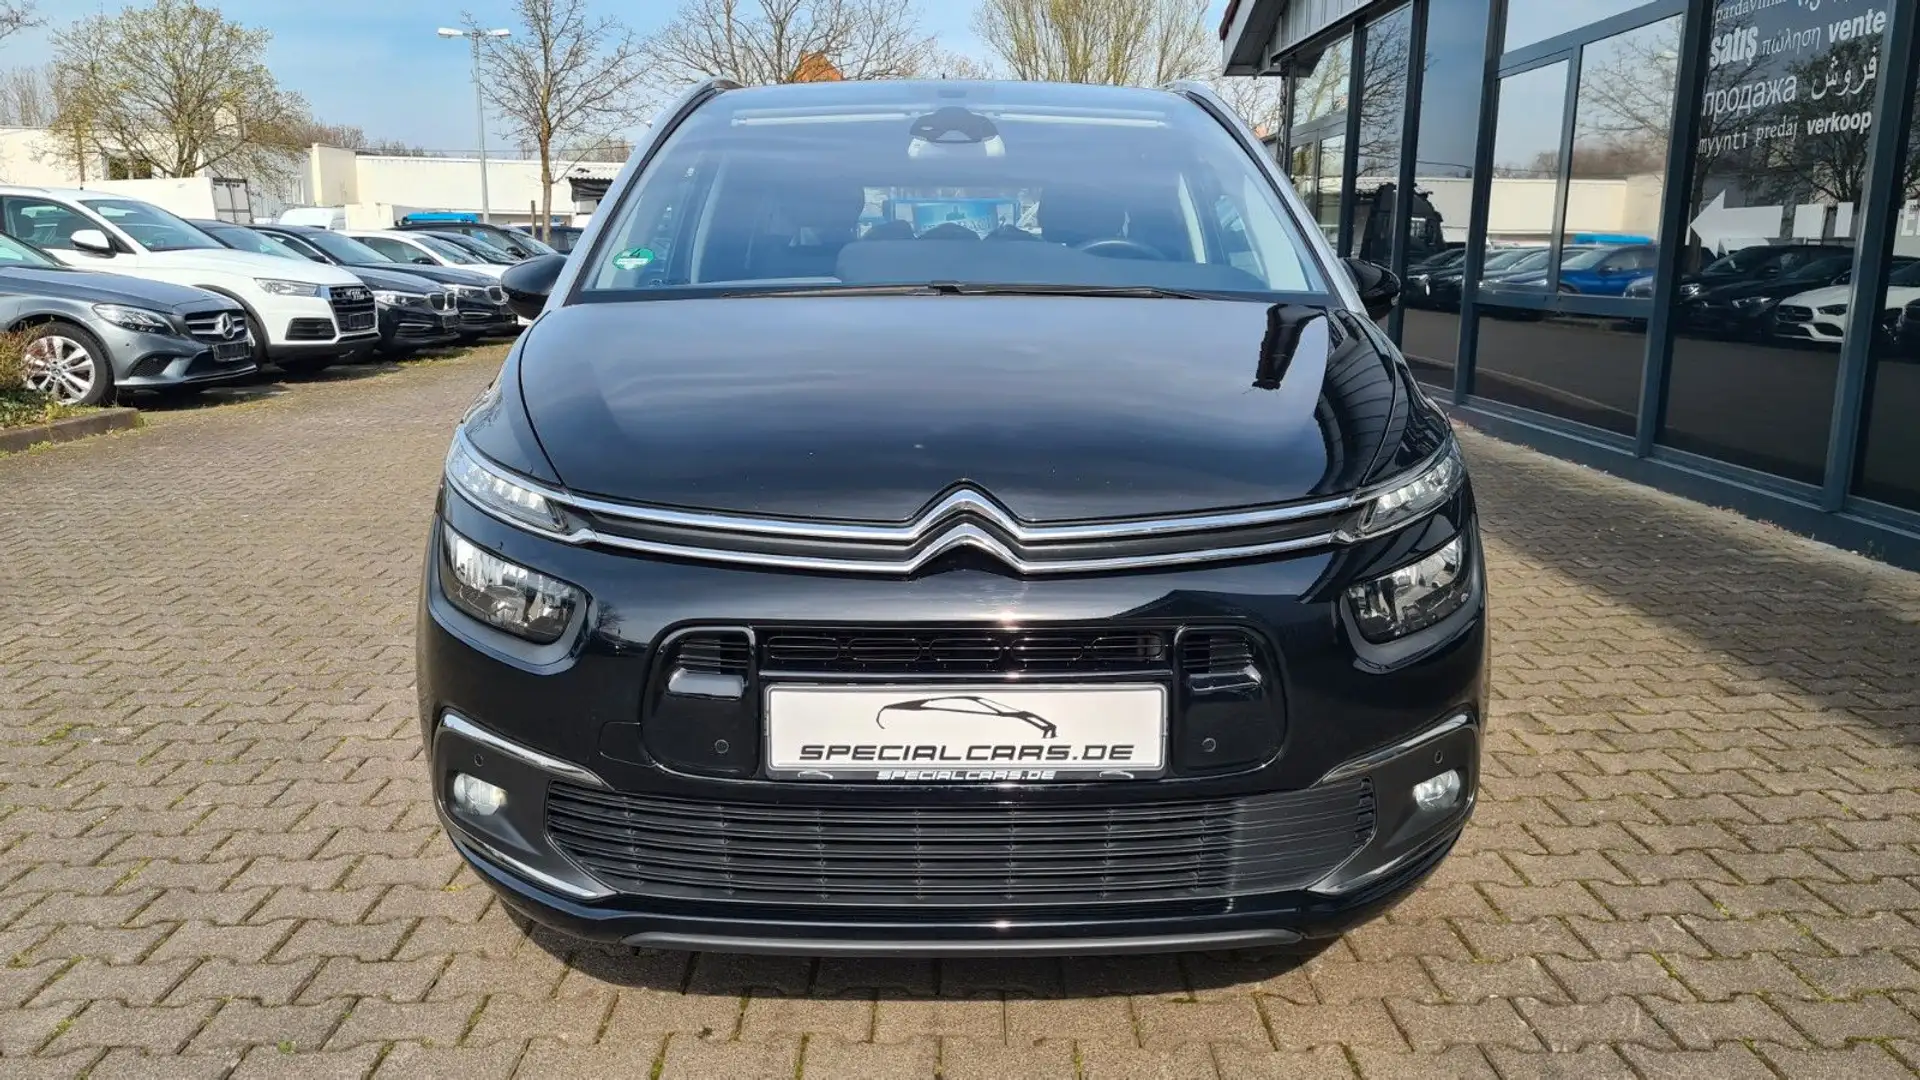 Citroen Grand C4 Picasso /Spacetourer Selection - ASSISTS Siyah - 2